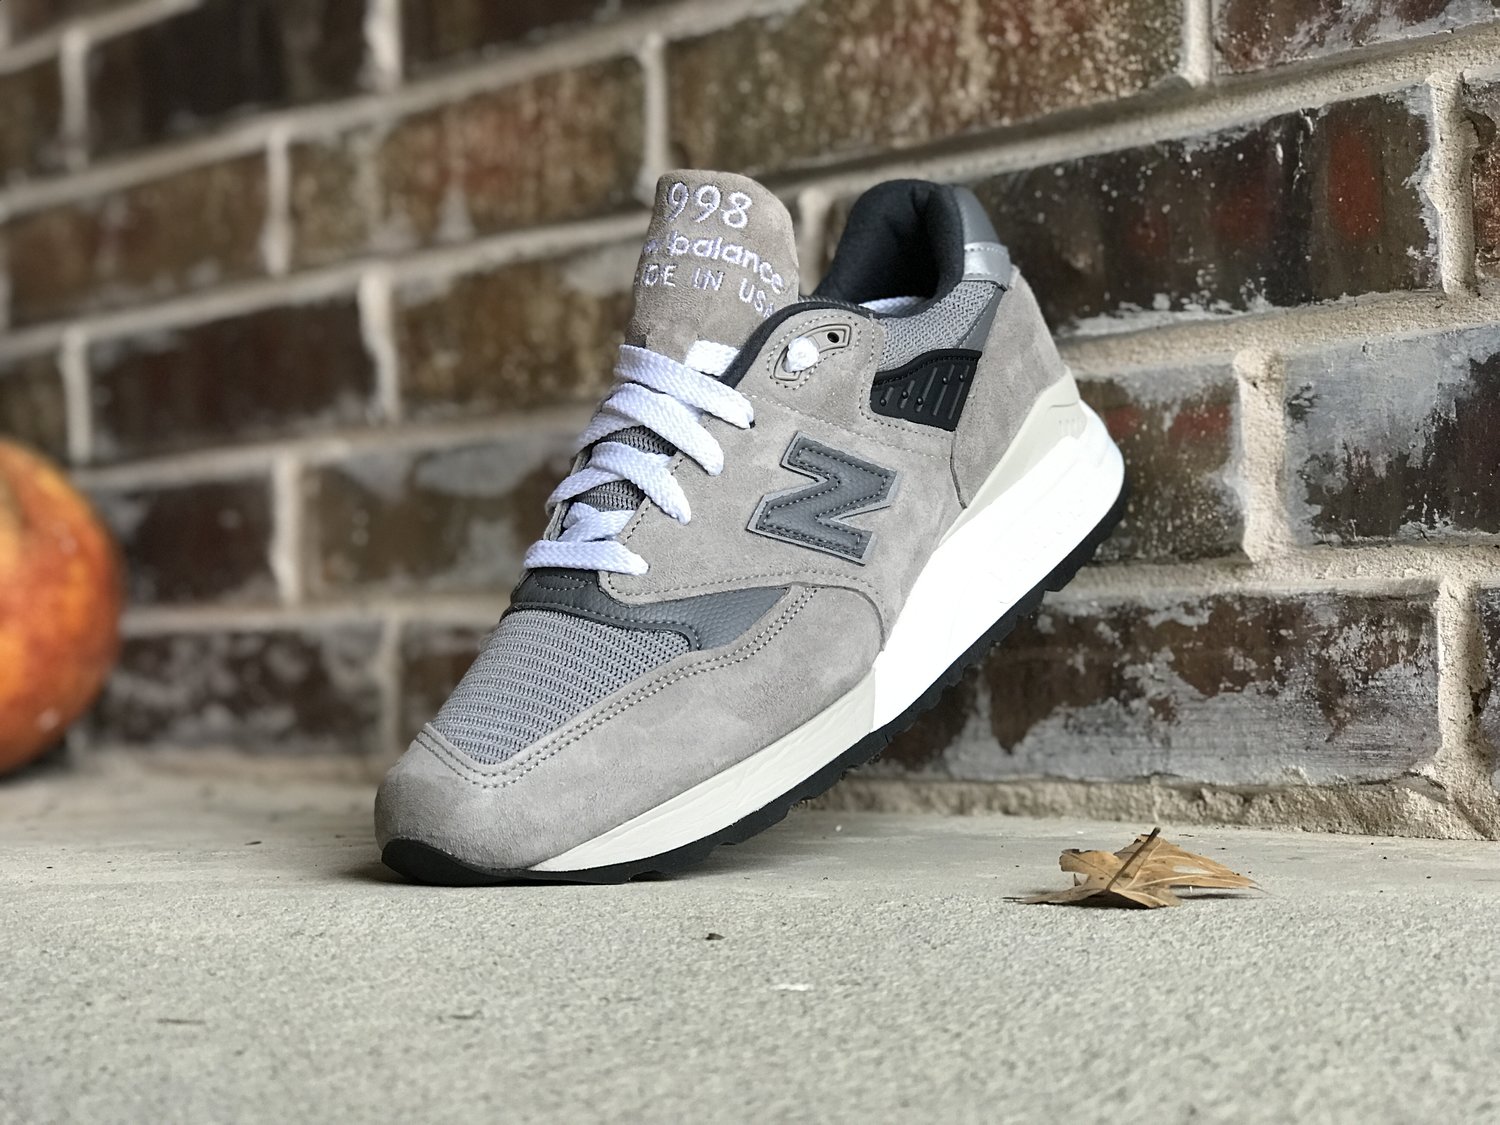 A Look At The New Balance 998 "Cityscape" [Unboxing] | The Retro Insider